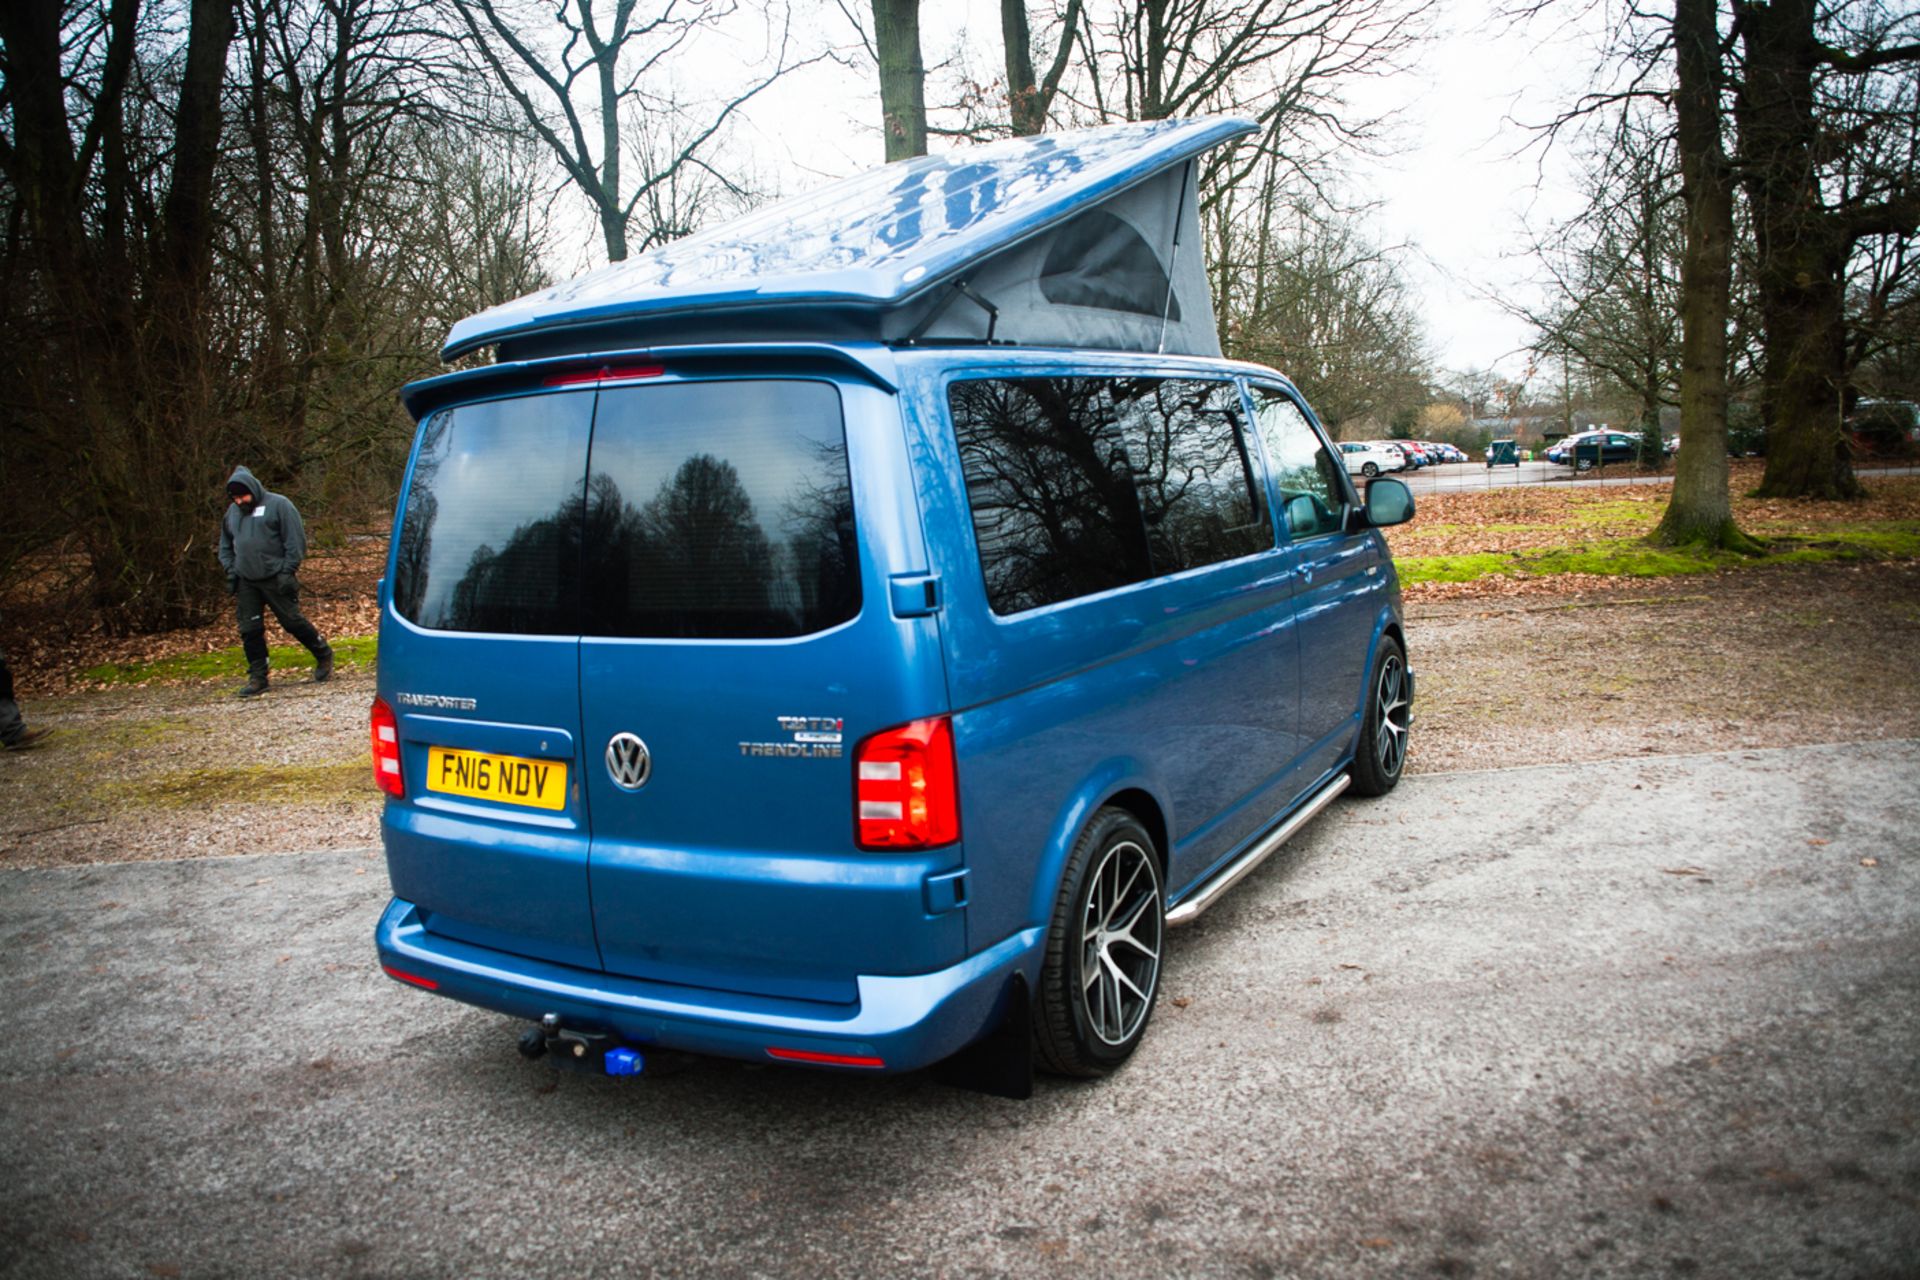 2016 Volkswagen Transporter With Full Unused Camper Conversion - Image 5 of 31